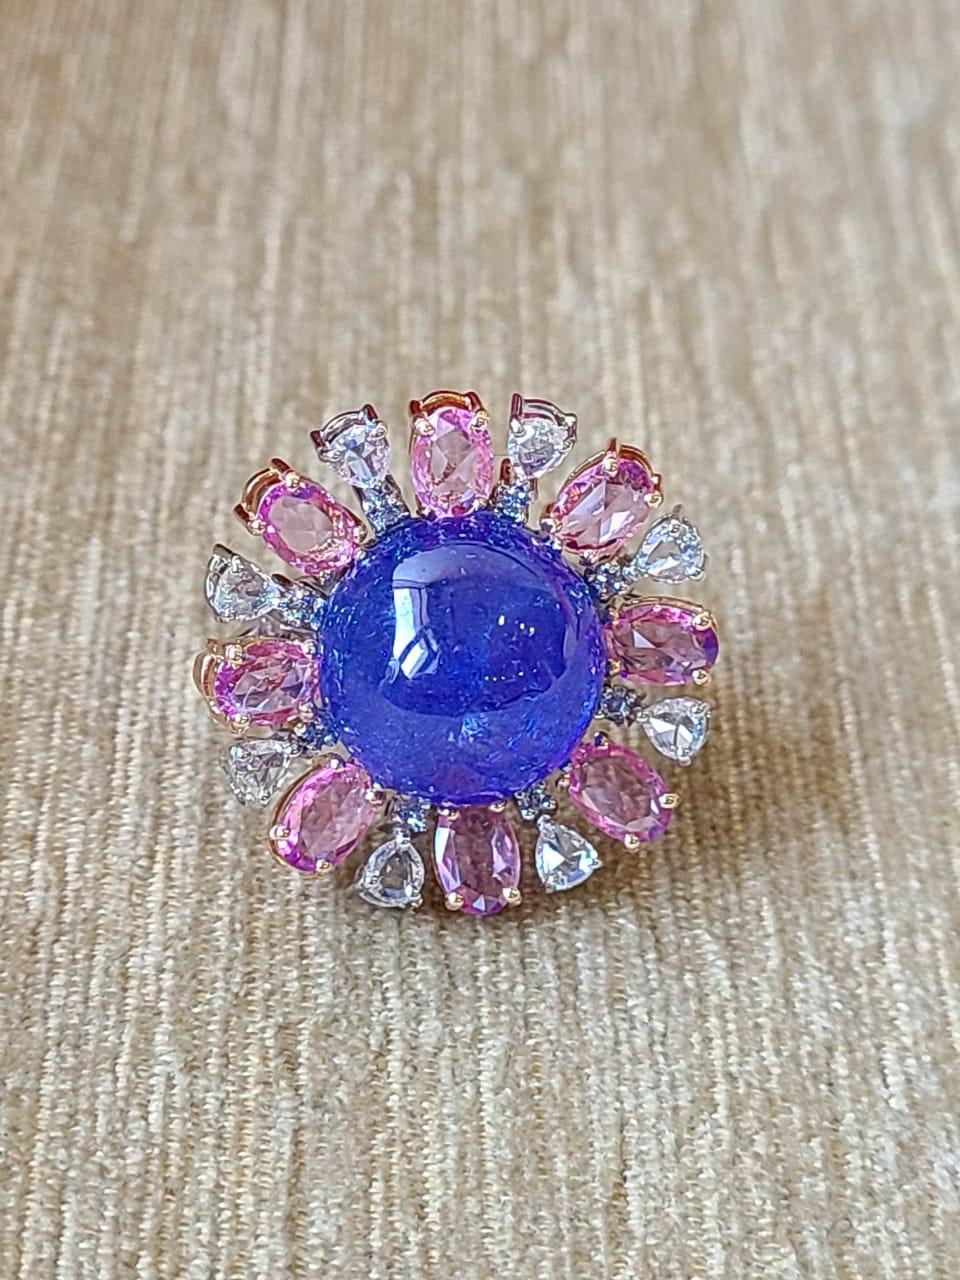 A very gorgeous and one of a kind, Tanzanite & Pink Sapphire Cocktail Ring set in 18K Gold & Diamonds. The weight of the Tanzanite is 17.60 carats. The Tanzanite is ethically sourced from Tanzanite. The weight of the Pink Sapphires is 2.80 carats.